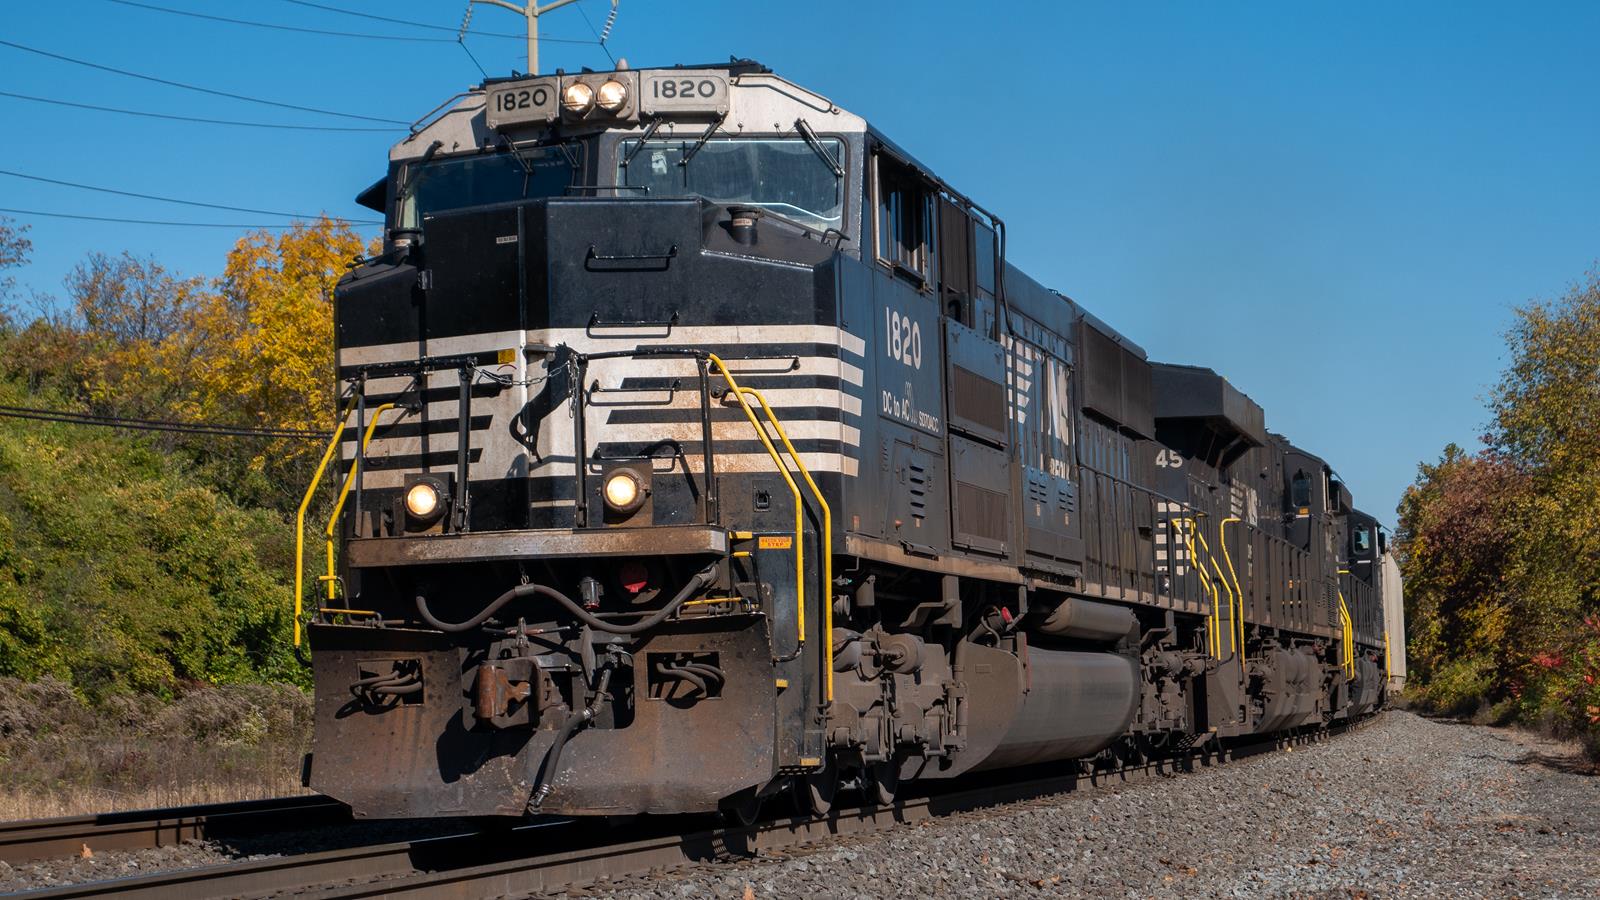 1820 is a class sd70acc and  is pictured in Wyomissing, Pennsylvania, United States.  This was taken along the Norfolk Southern Harrisburg Line on the Norfolk Southern. Photo Copyright: Sean McCaughey uploaded to Railroad Gallery on 11/13/2022. This photograph of 1820 was taken on Saturday, October 29, 2022. All Rights Reserved. 